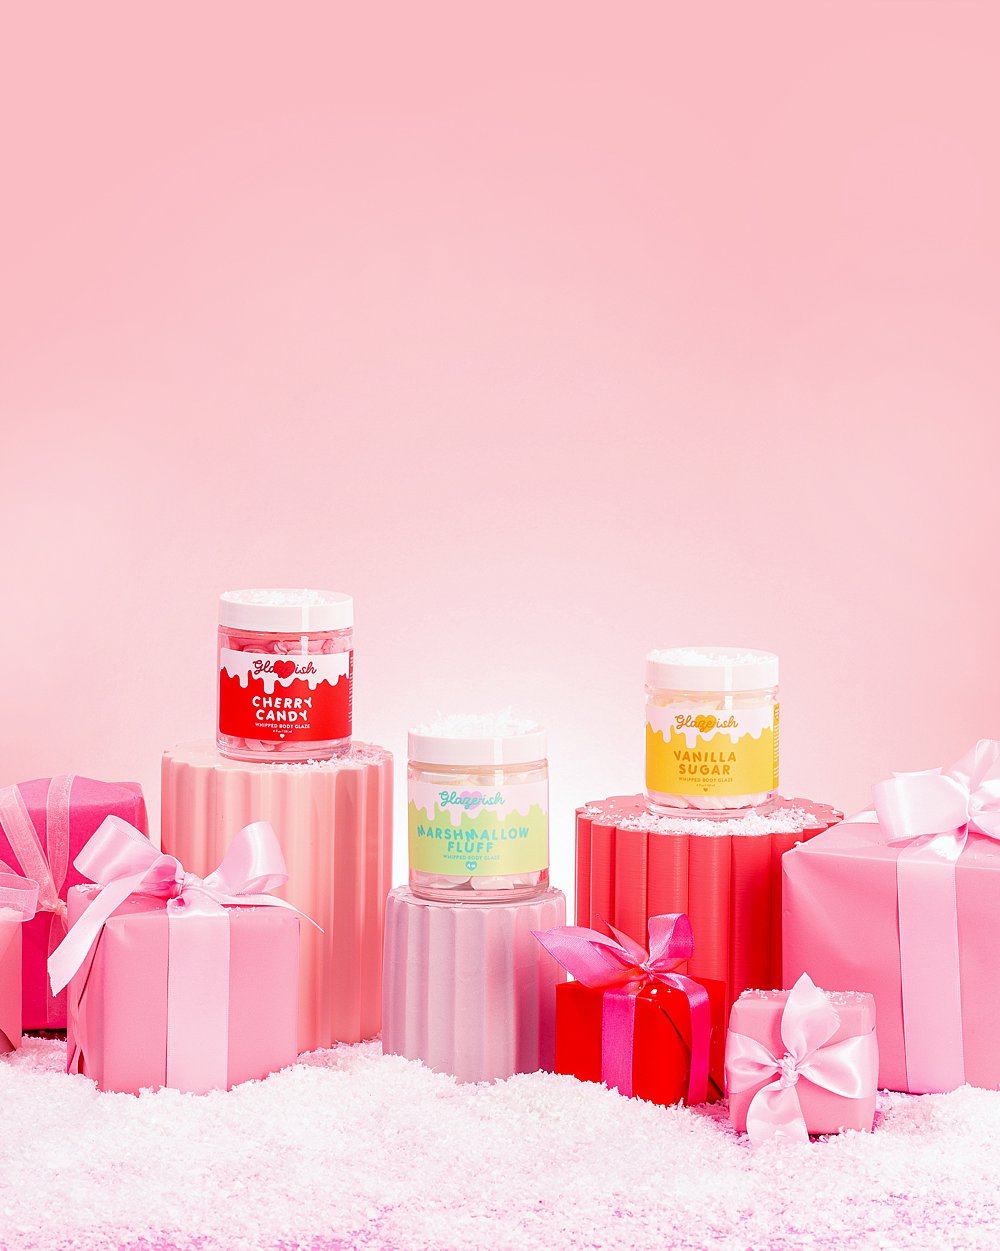 Colourful content creation and creative still life photography for Glzeish skincare. Playful product photography, art direction and styling by HIYA MARIANNE.